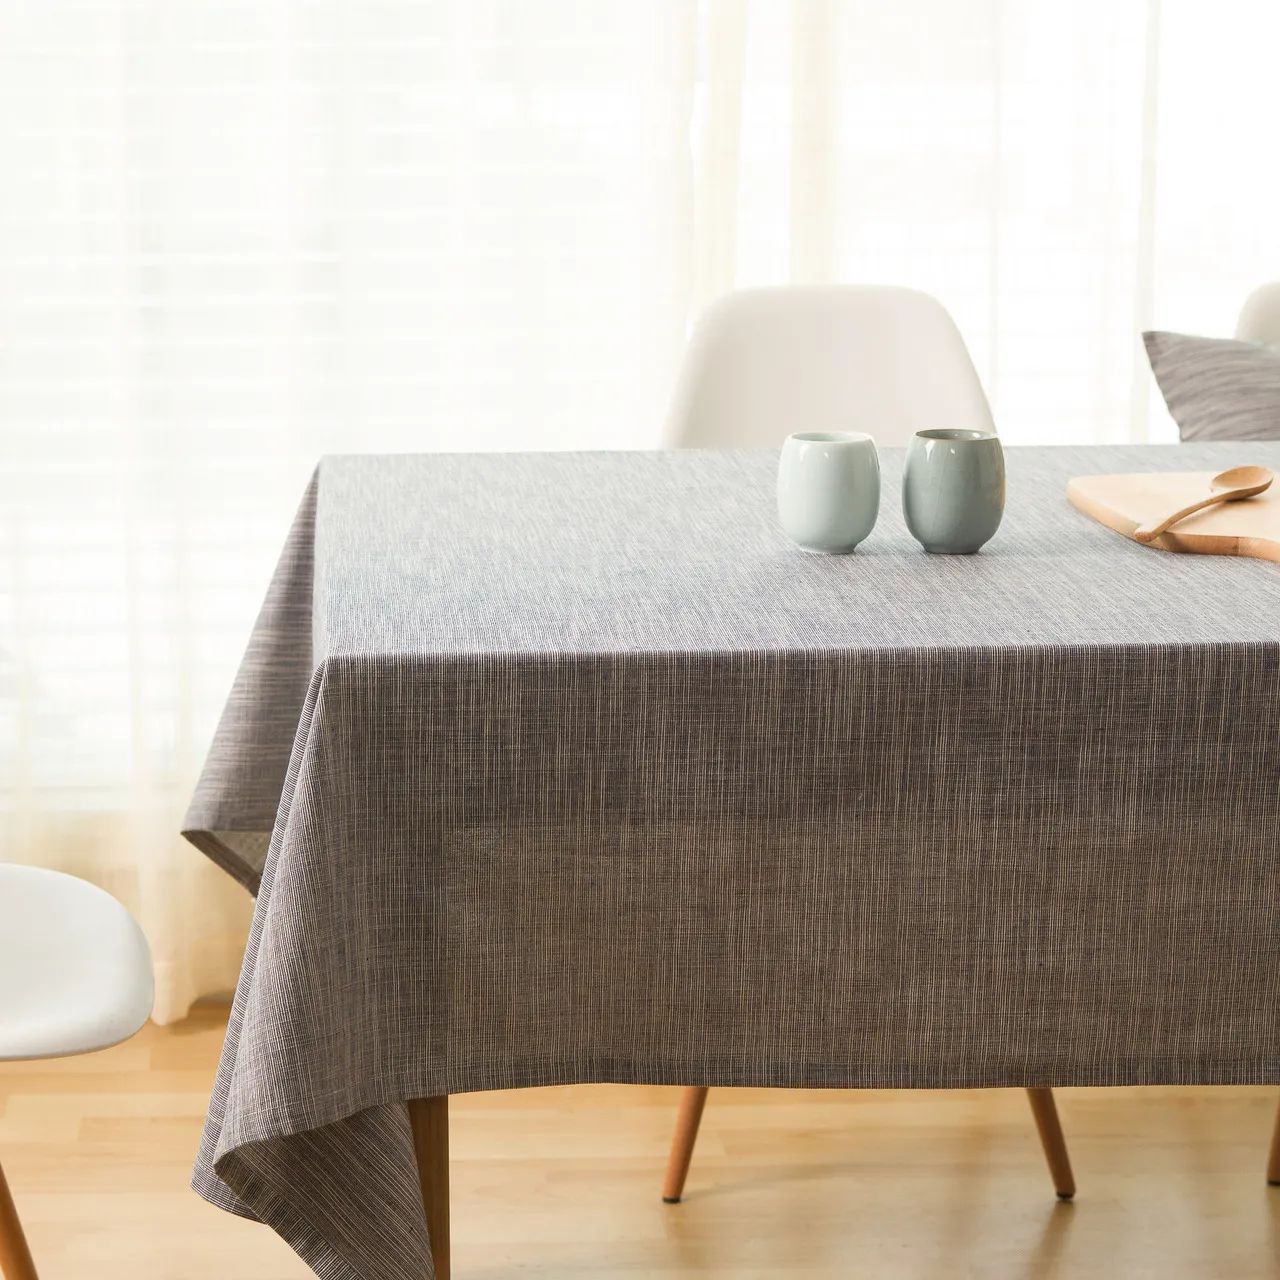 Grey Waterproof Cotton Linen Tablecloths Decorative Oblong Table Cover Easy To Care For Kitchen